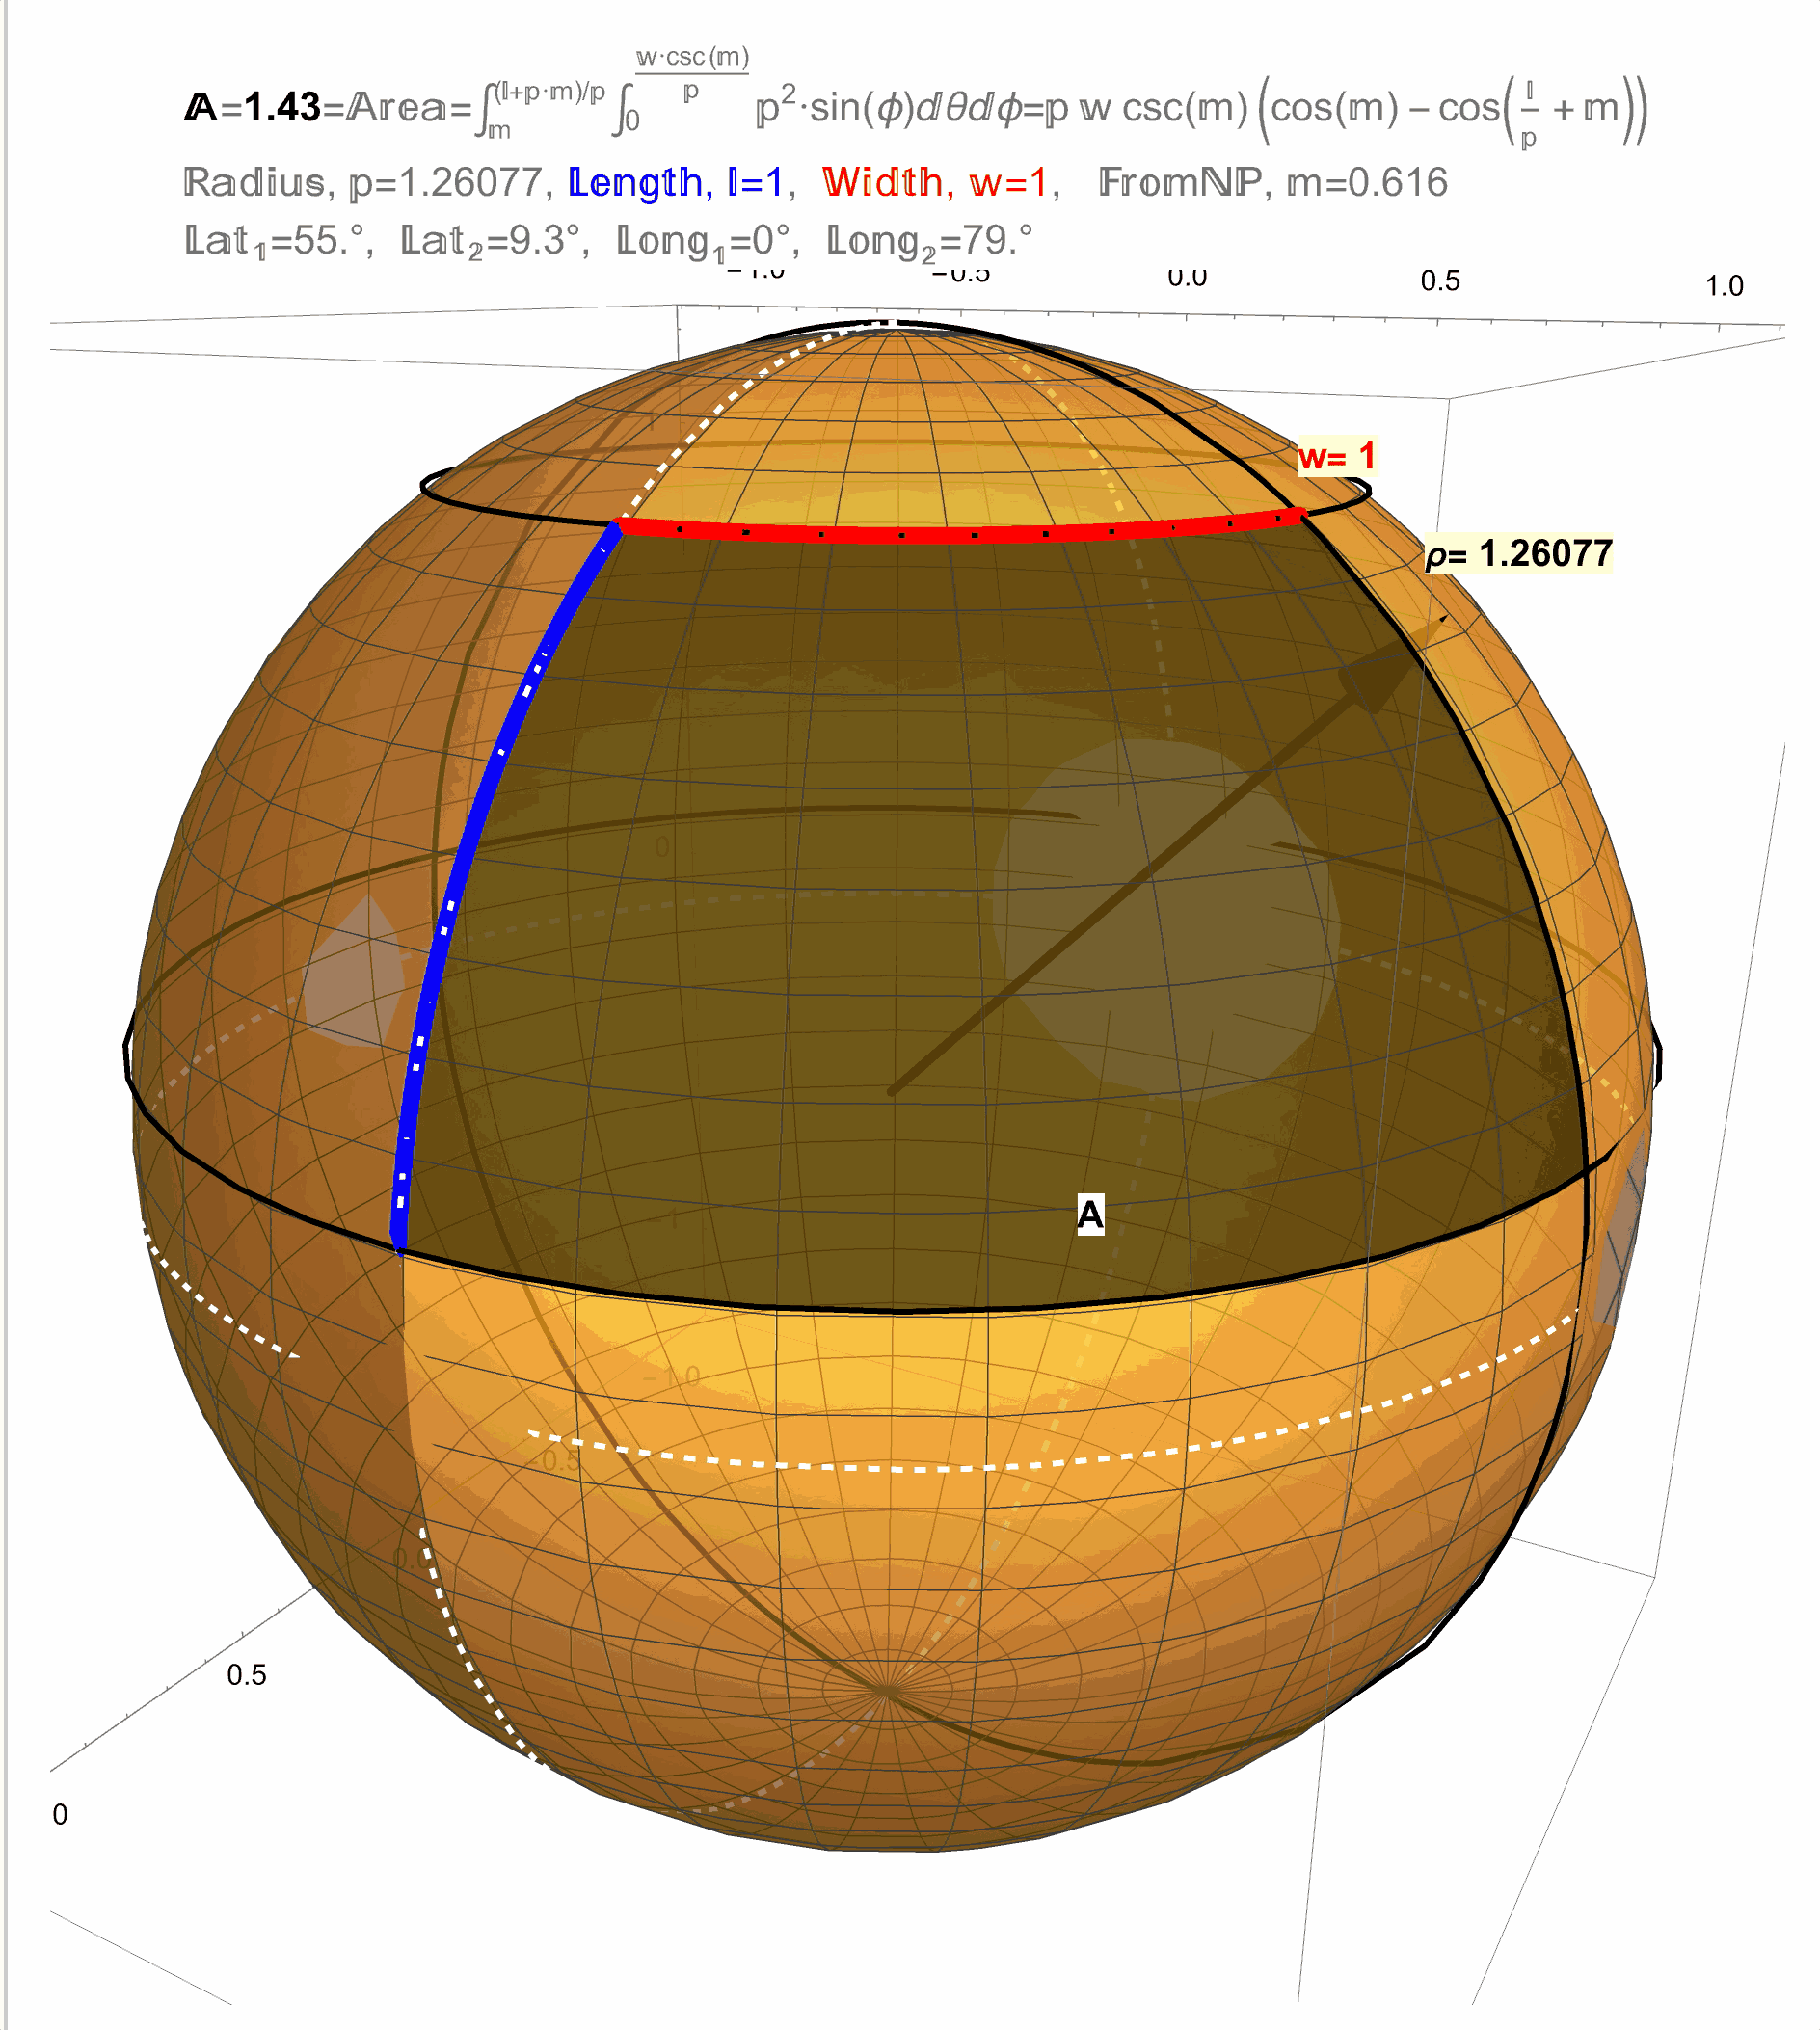 Result 2: The area of a \(1 \times 1\) square on a sphere approaches \(A=1\) as the radius of the sphere \(\rho\) increases.